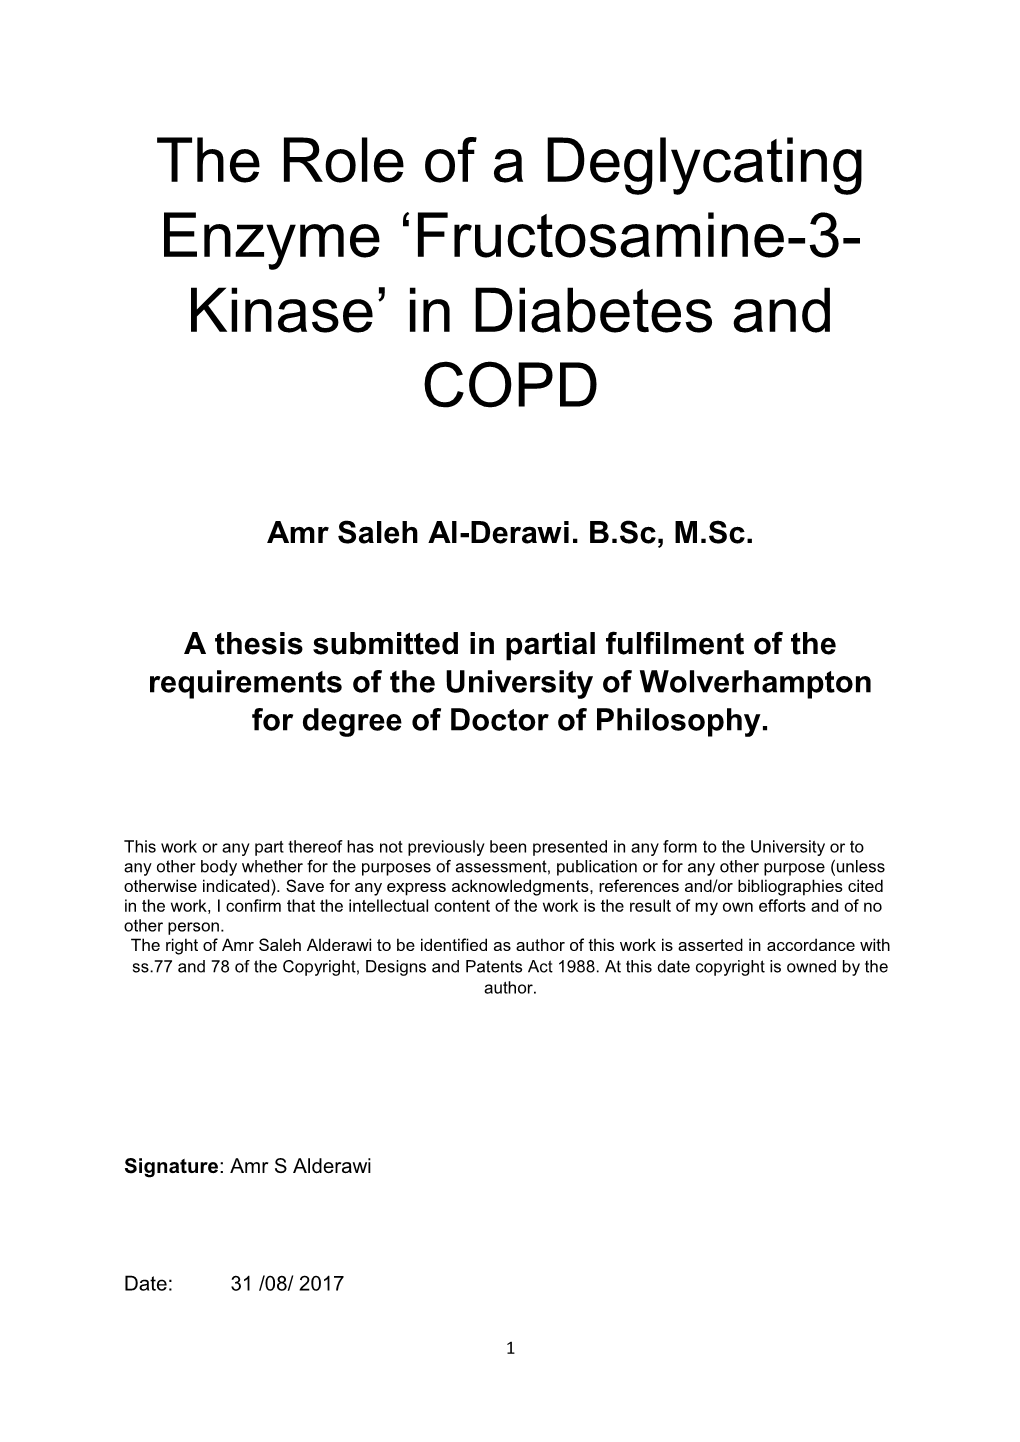 The Role of a Deglycating Enzyme 'Fructosamine-3- Kinase'